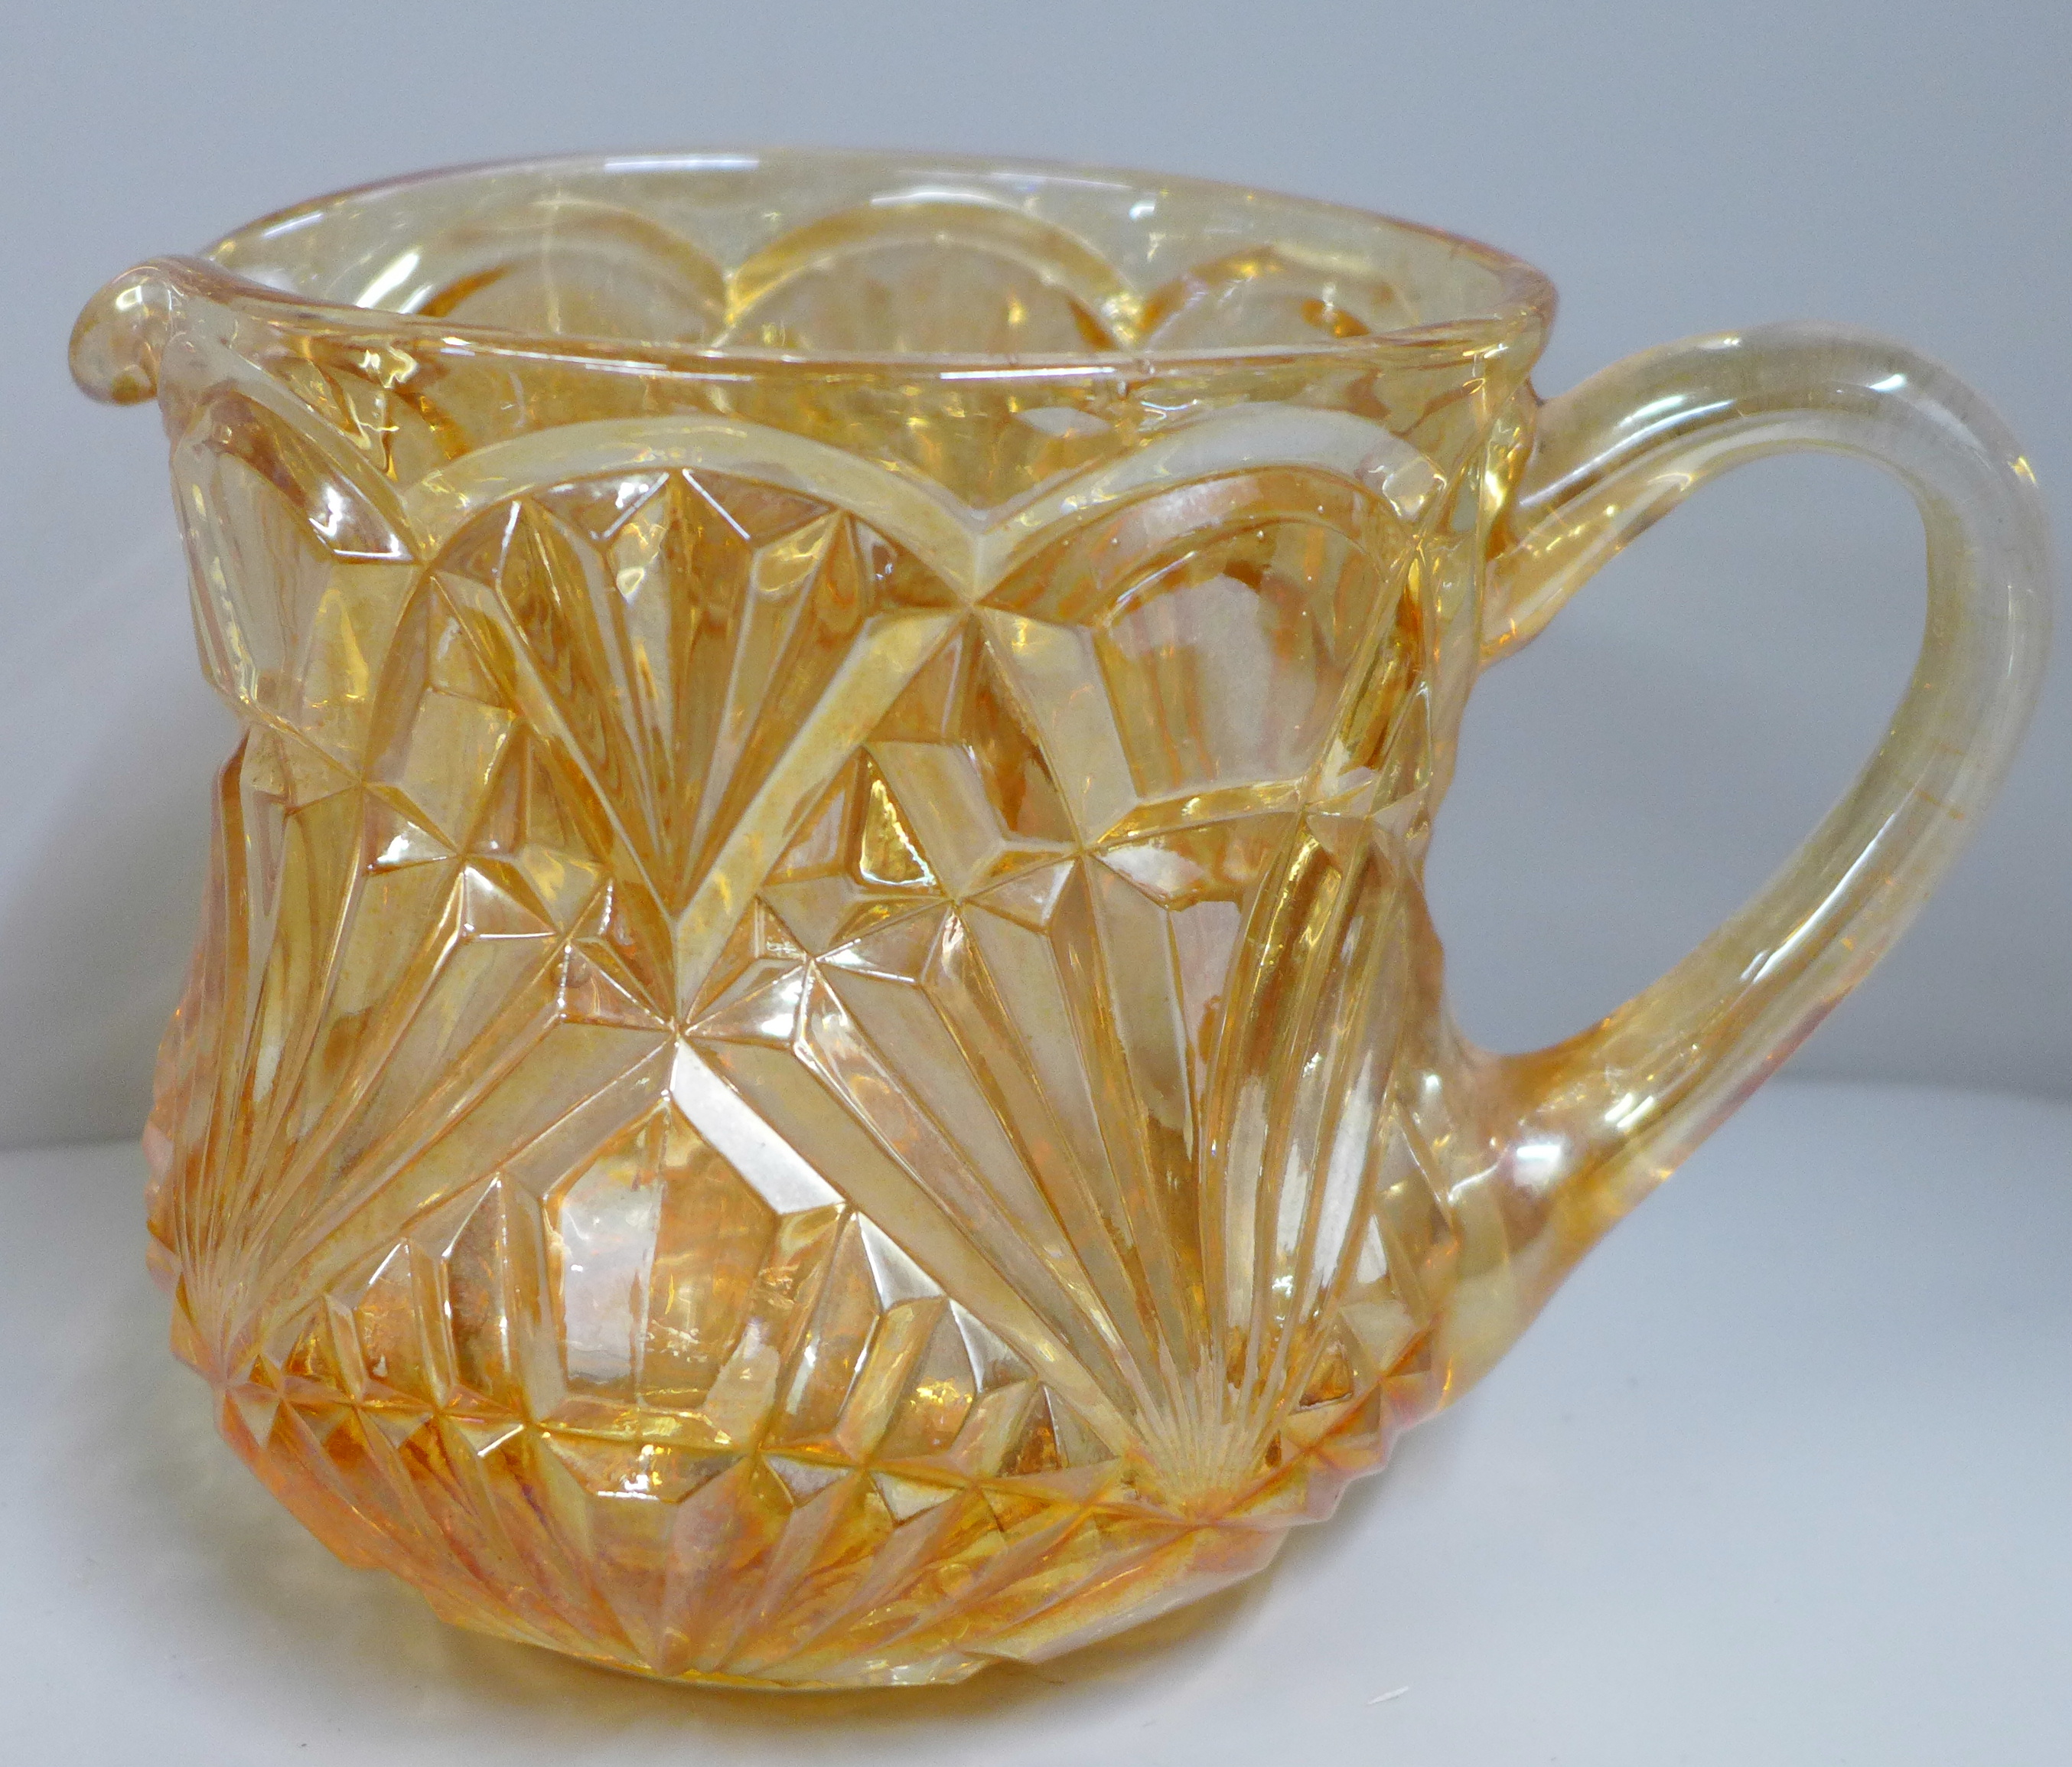 Ten items of marigold carnival glass, five jugs/pitchers, two pedestal bowls, other bowls - Image 4 of 7